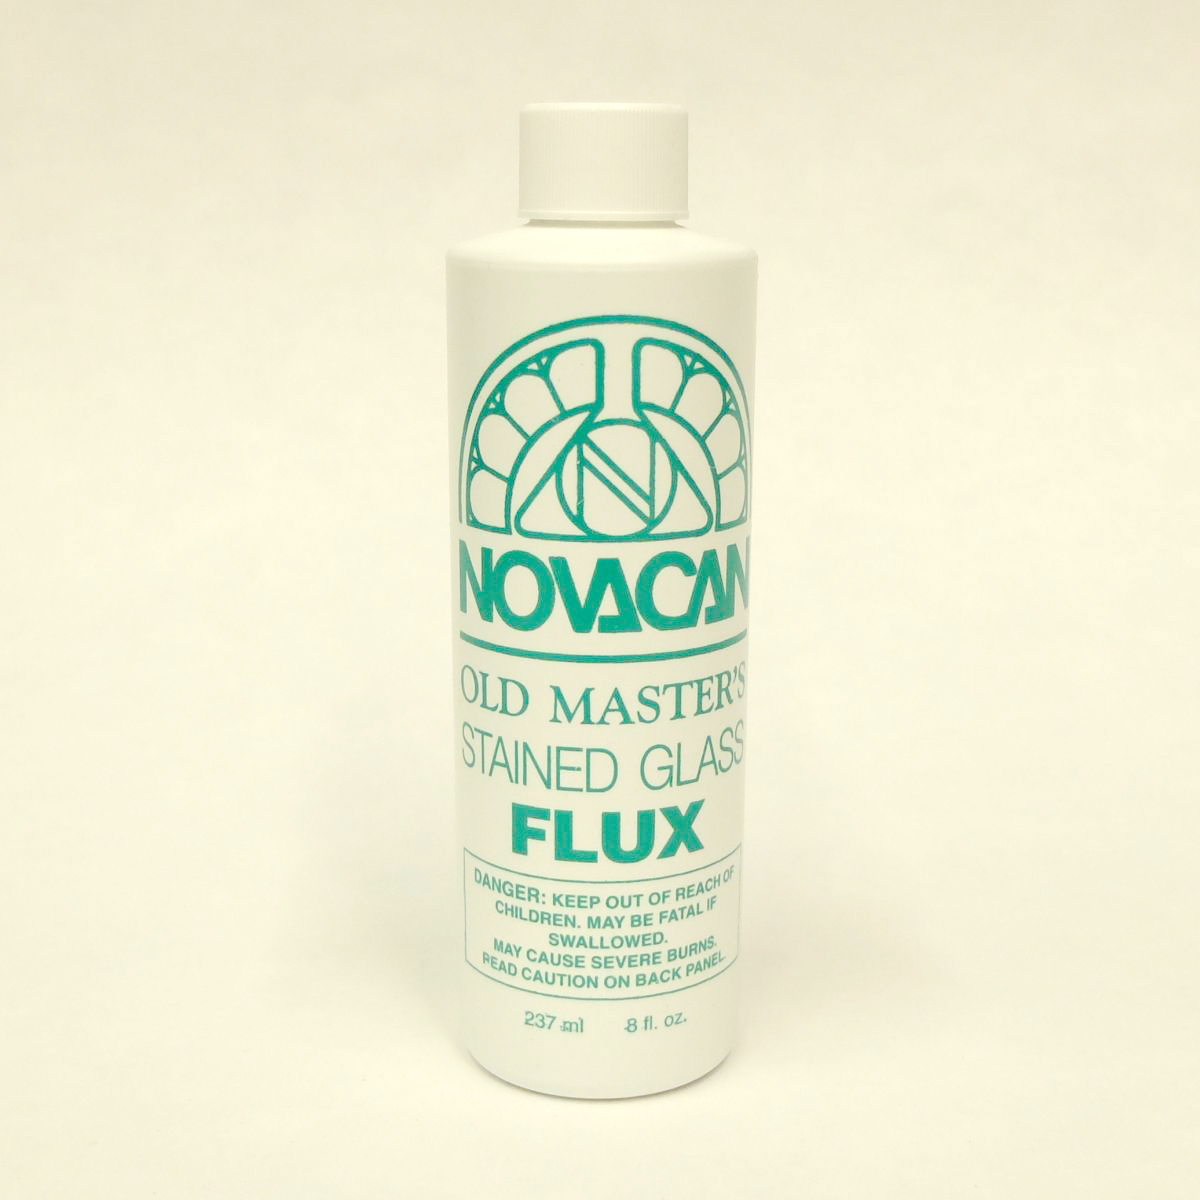 Novacan Old Masters Flux Stained Glass Supplies (8 Oz.) -Free